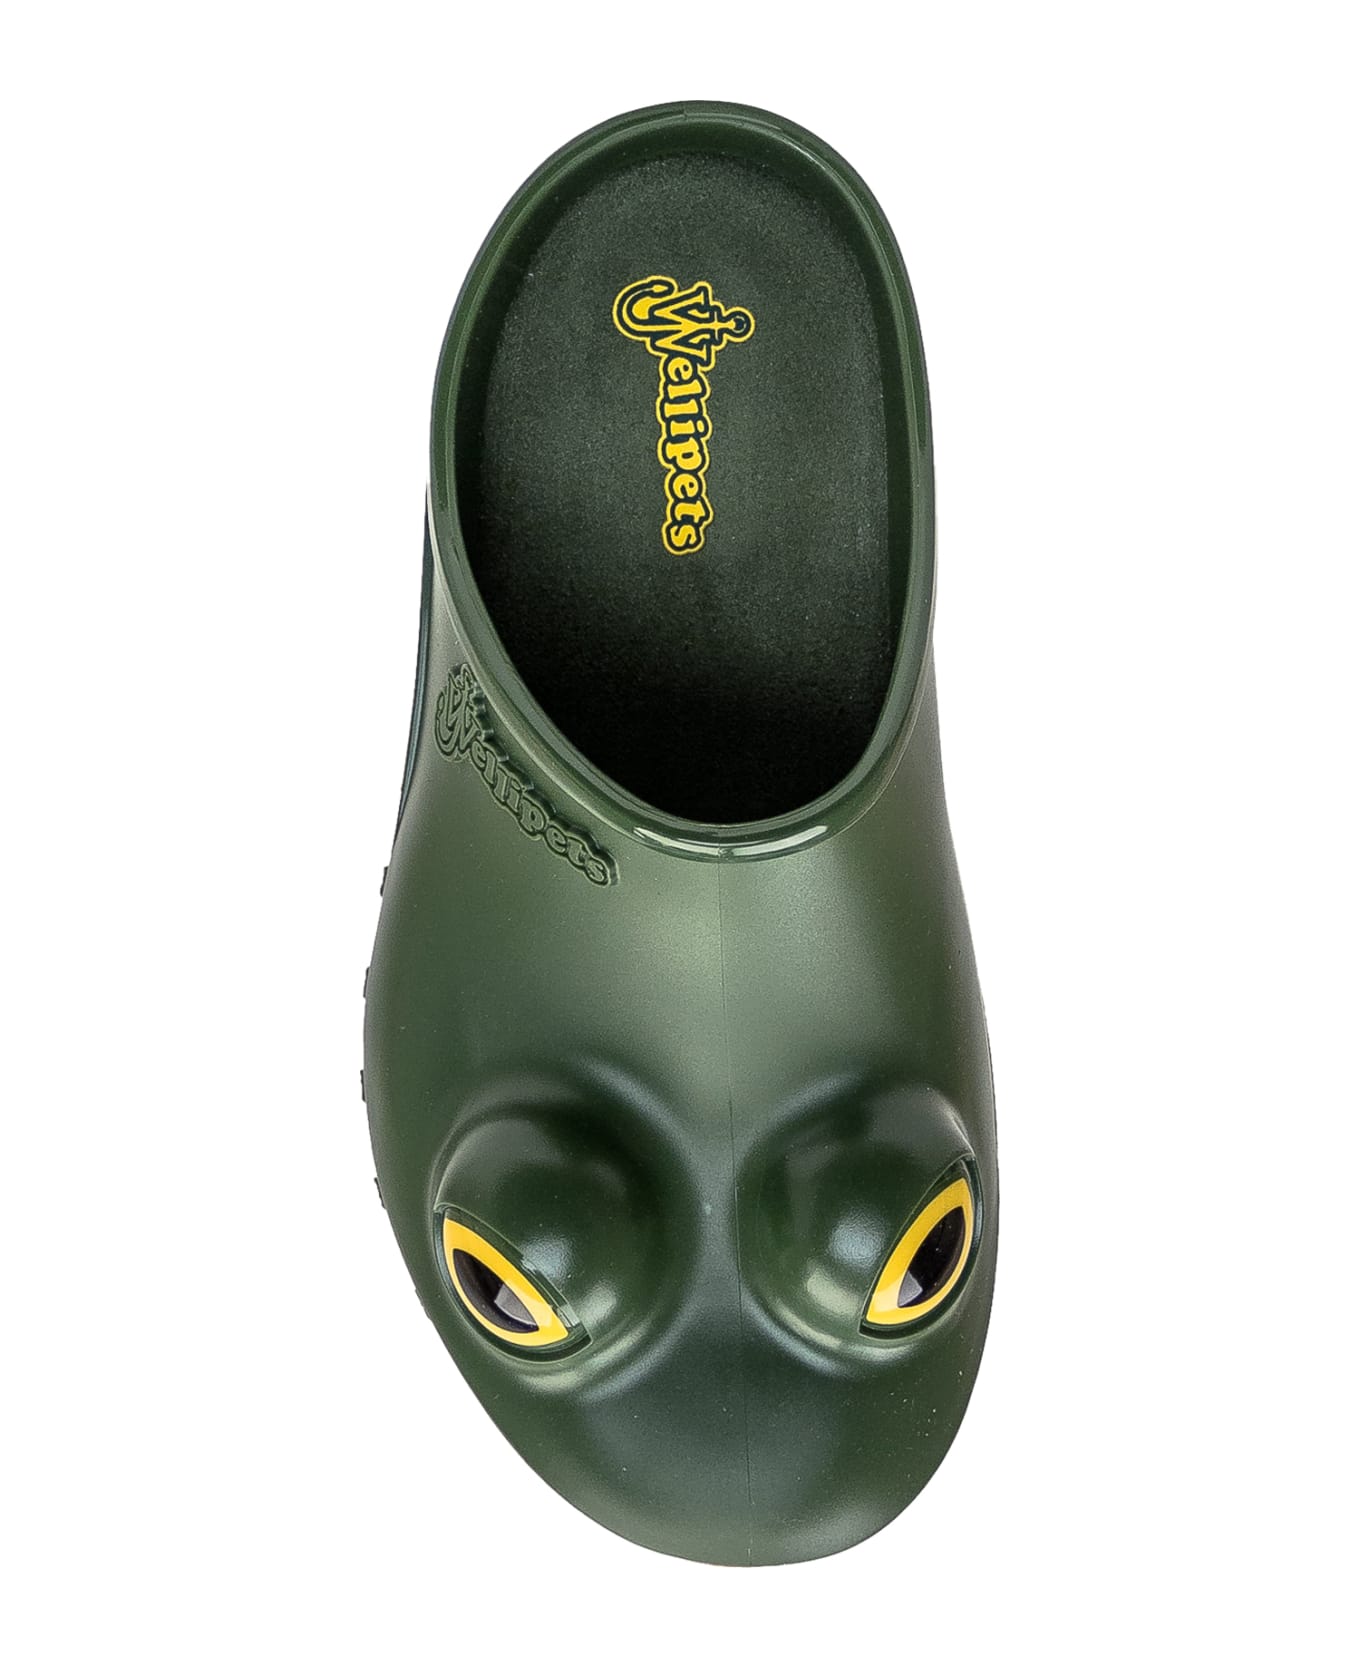 J.W. Anderson Jw Anderson X Wellipets Frog Mules - GREEN その他各種シューズ